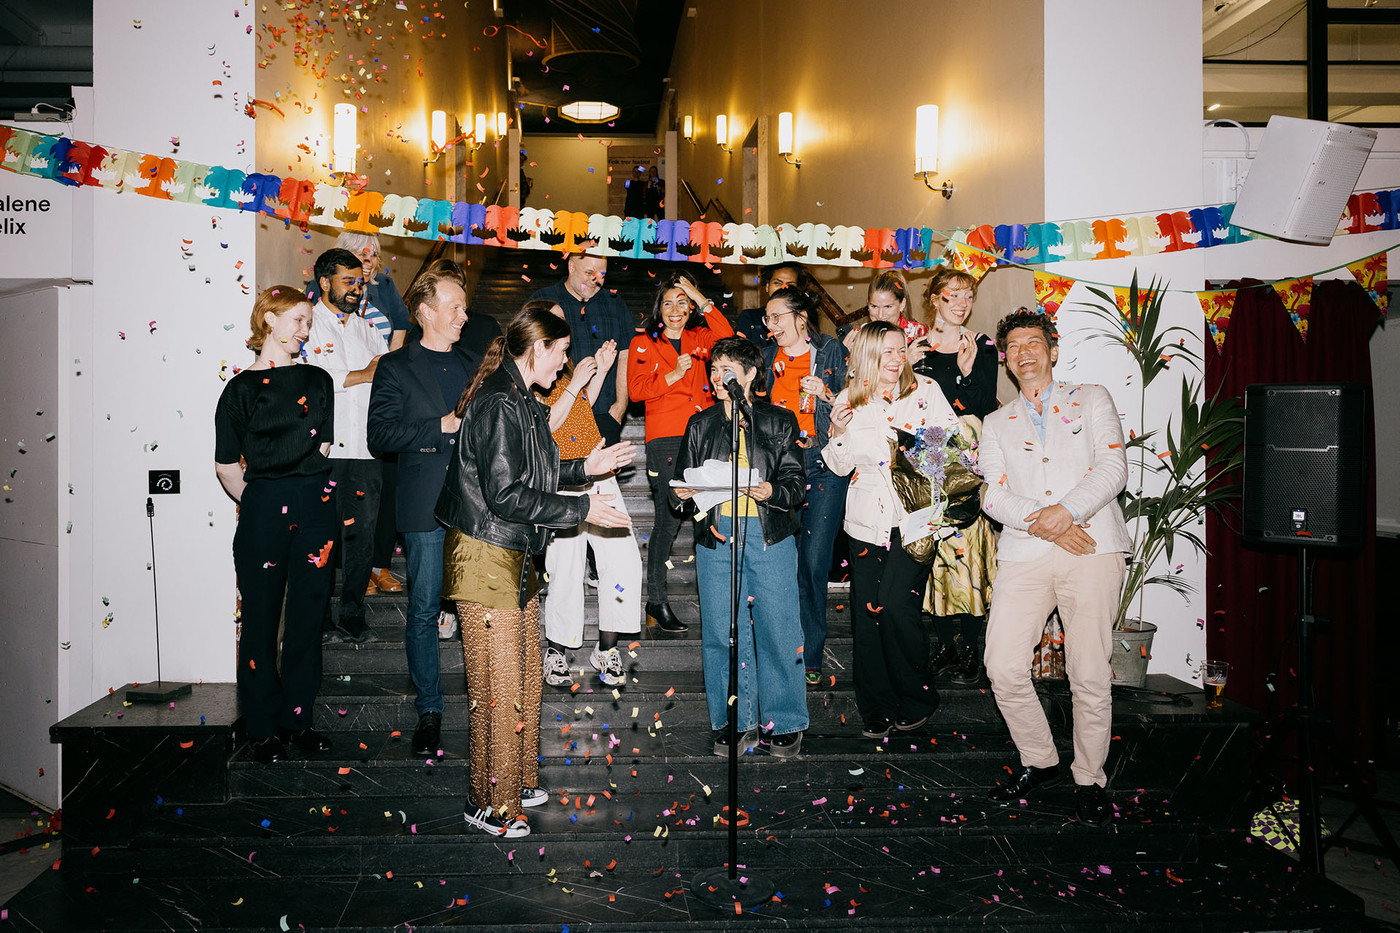 Fifteen representatives from Atelier Kunstnerforbundet is pictured in a staircase behind a microphone, in a cloud of confetti.